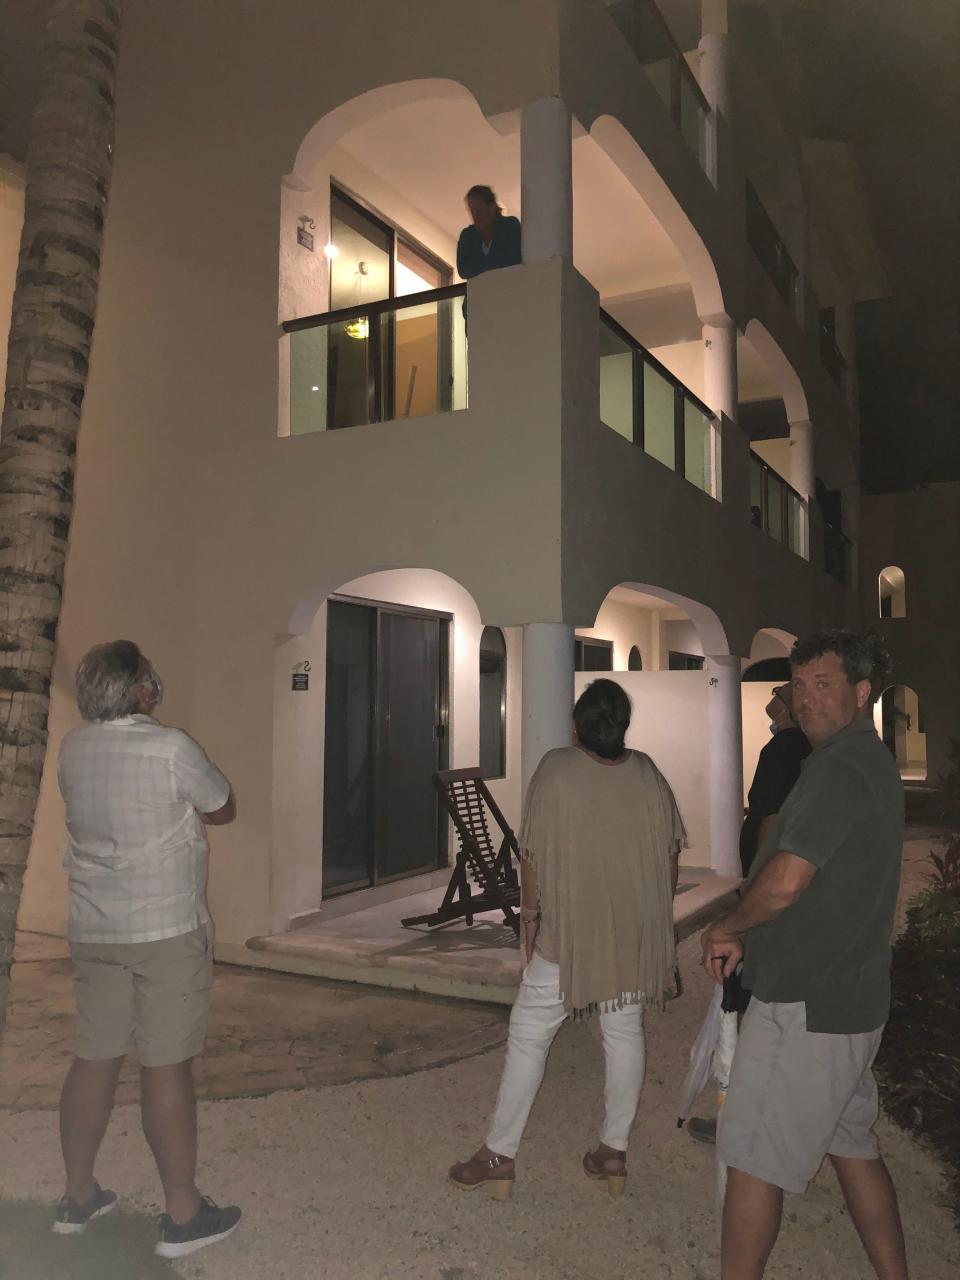 Lucia Rooney talks to friends and family members from her balcony during COVID isolation at El Dorado Casitas Royale resort in Riviera Maya, Mexico.